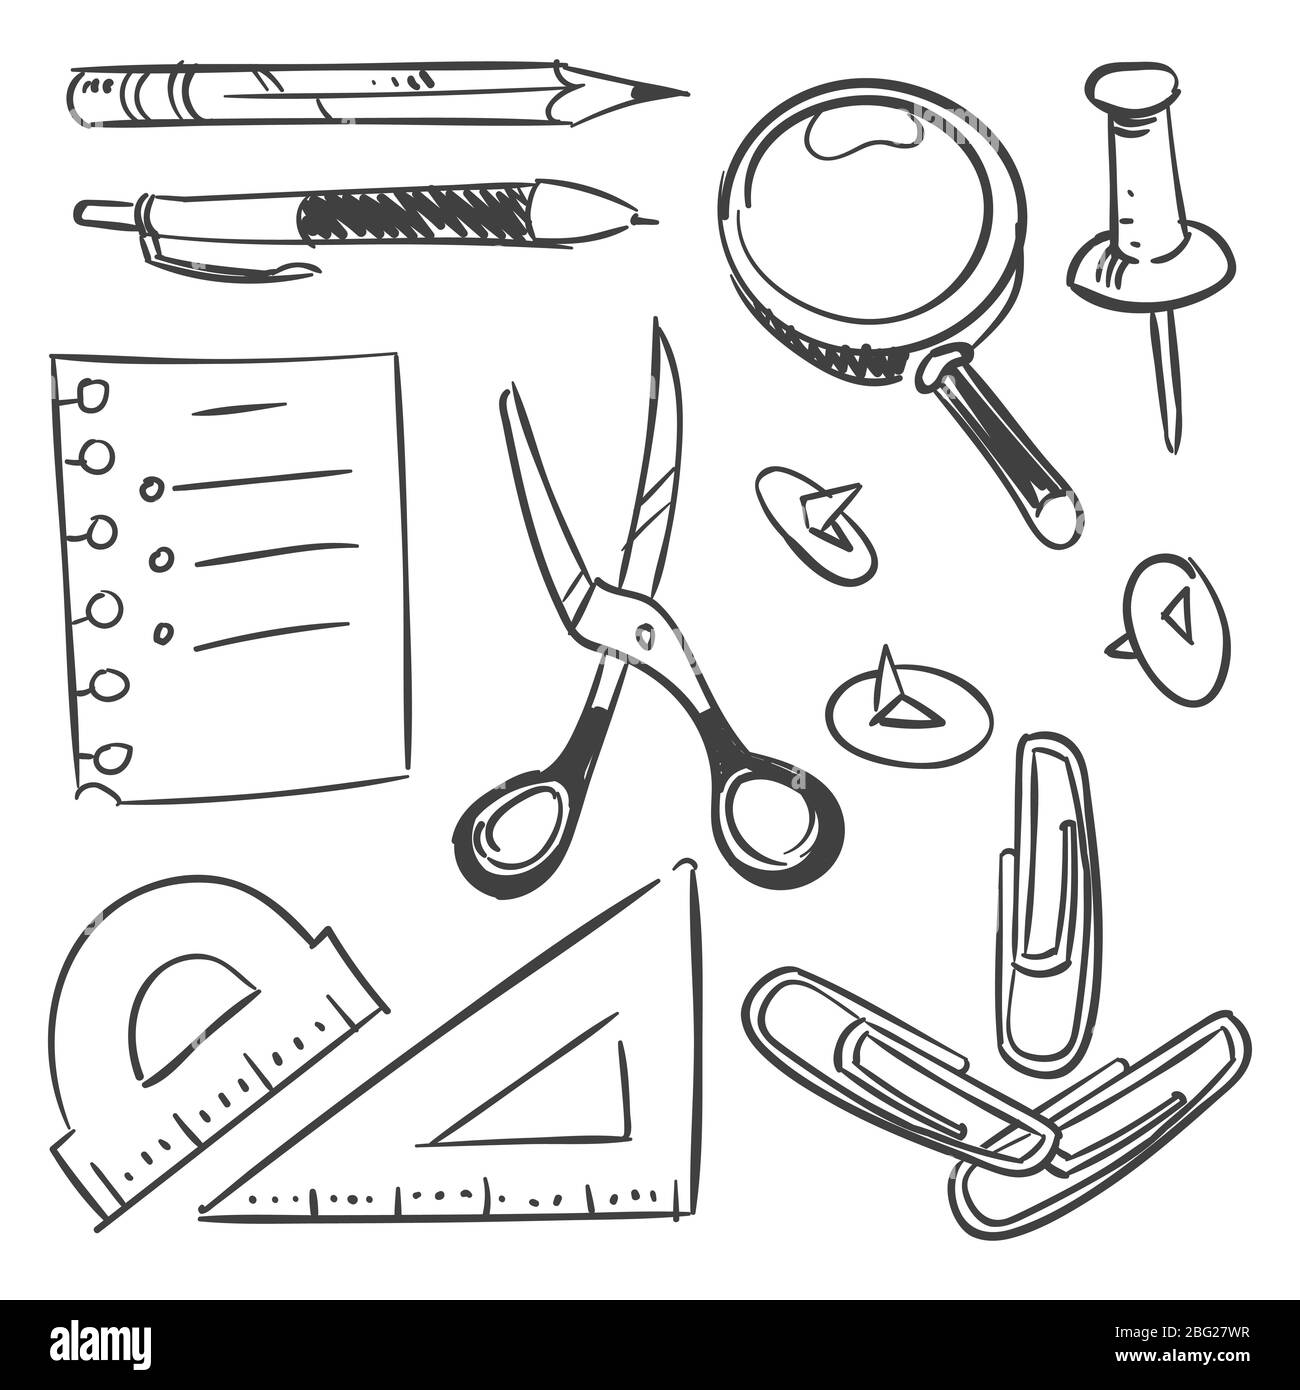 https://c8.alamy.com/comp/2BG27WR/stationery-sketch-set-scissors-pencil-pen-button-isolated-on-white-background-vector-pencil-and-pen-sketch-drawing-illustration-2BG27WR.jpg